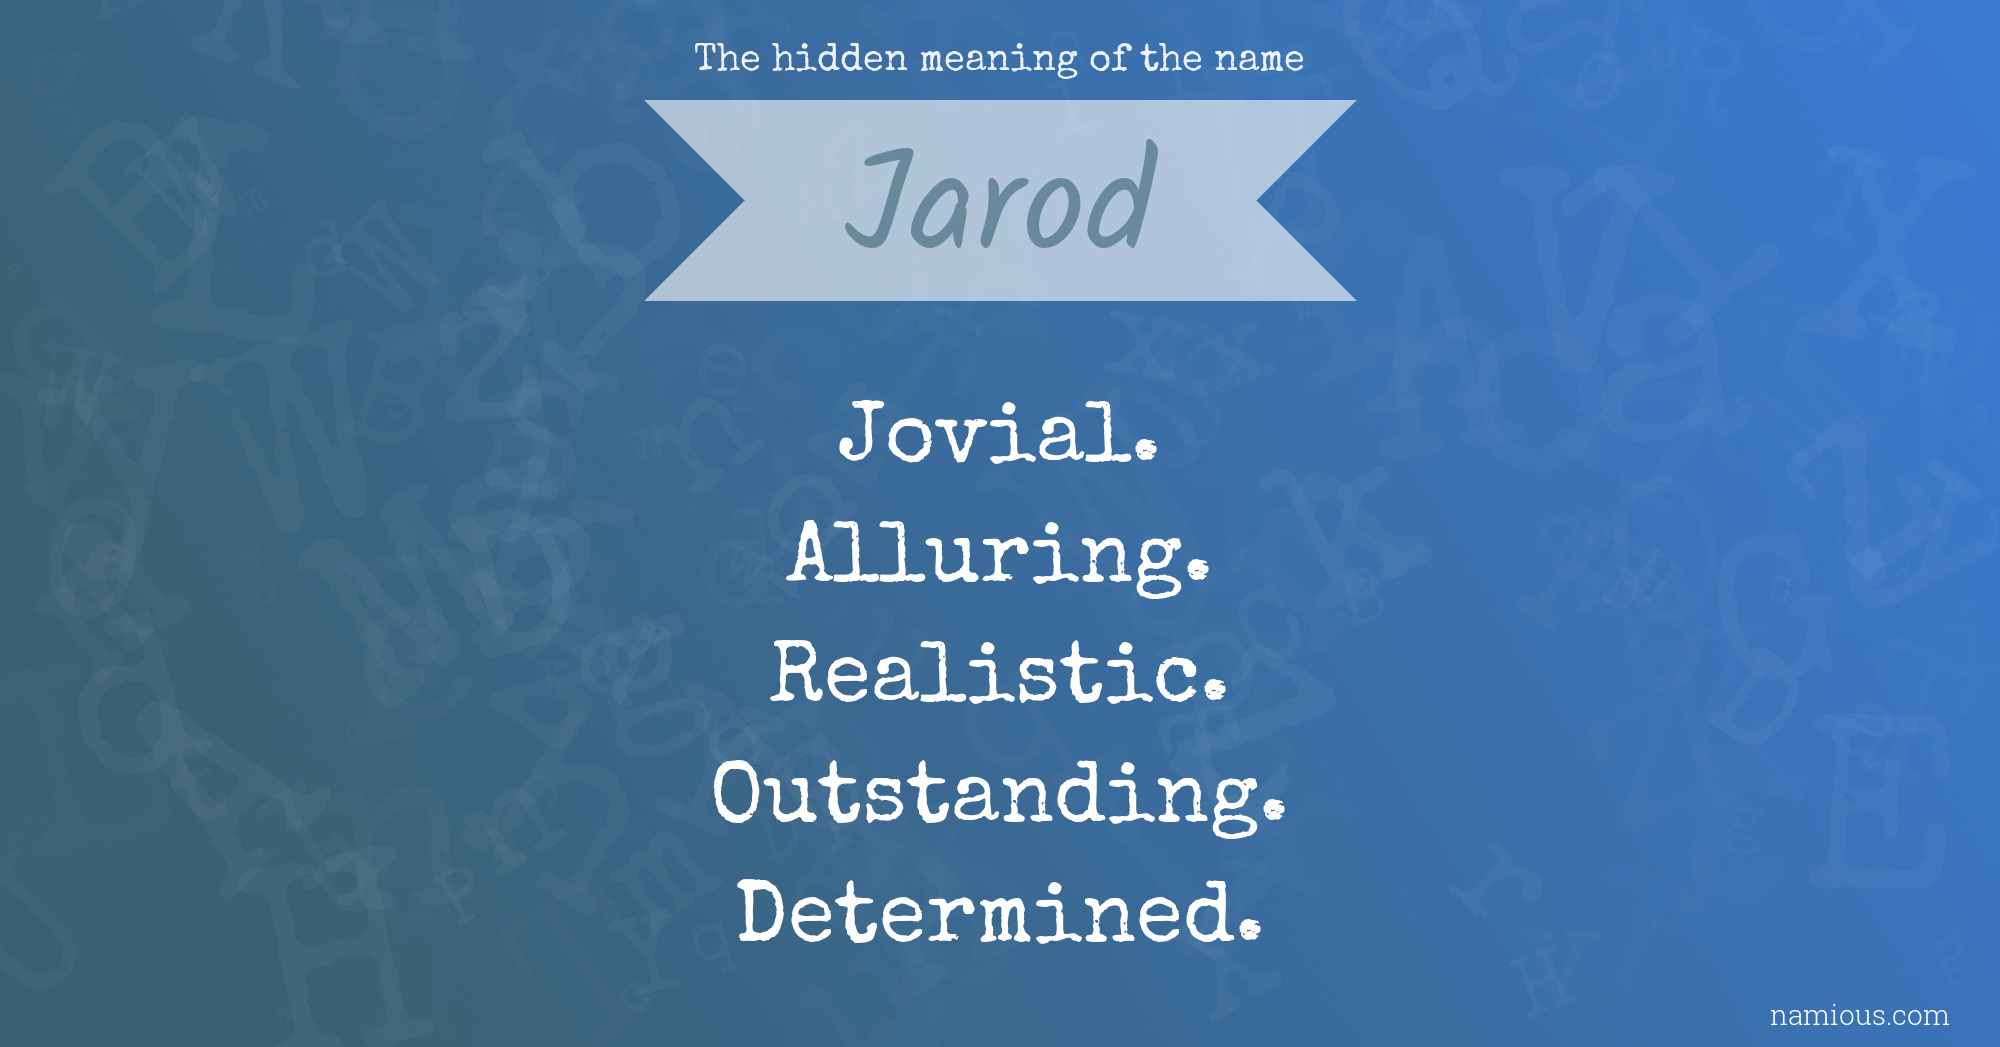 The hidden meaning of the name Jarod